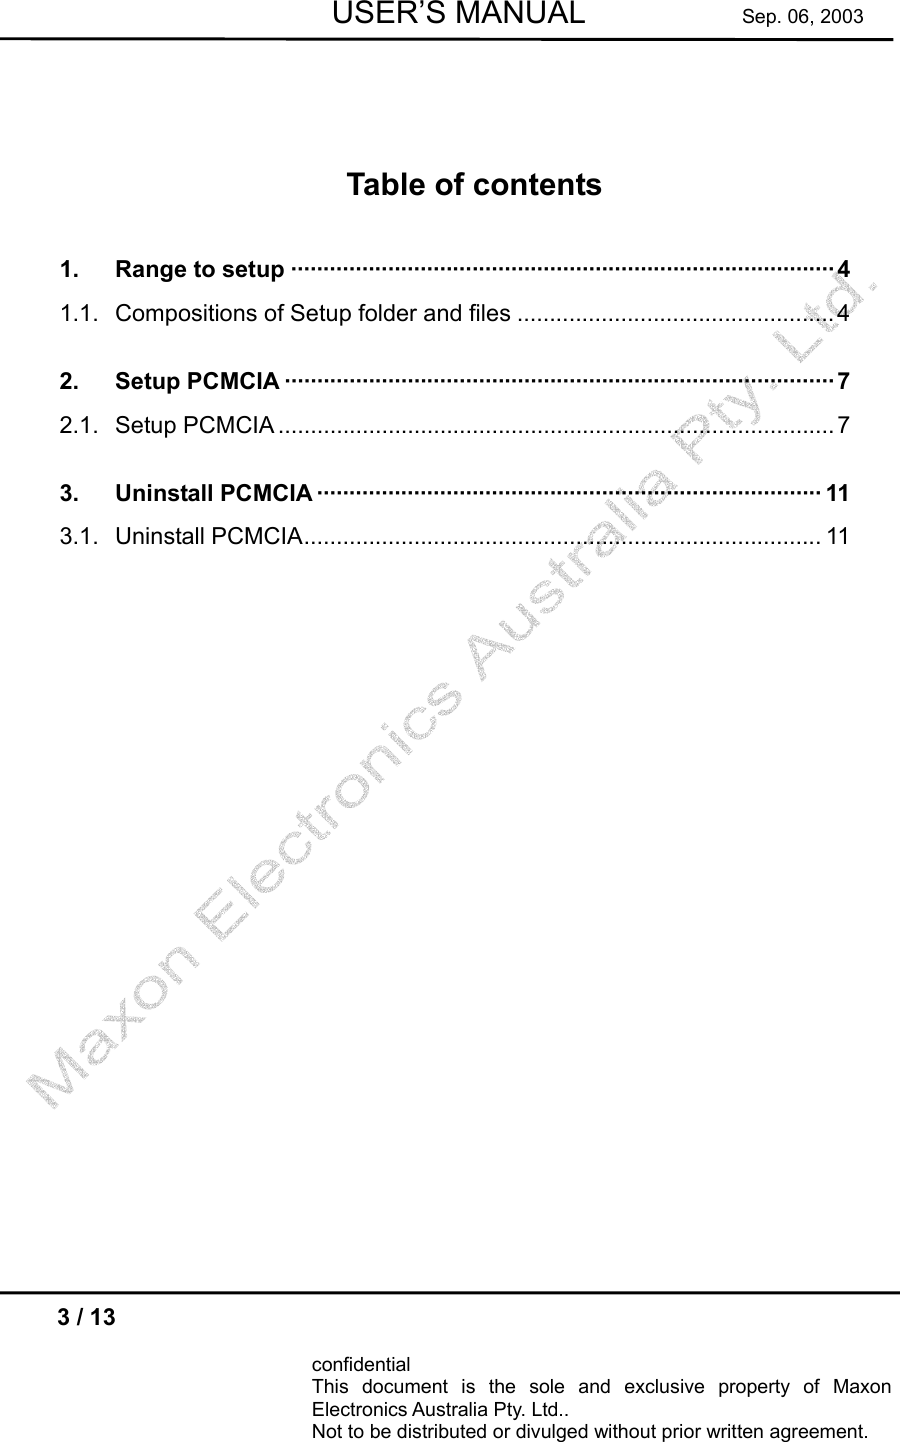        USER’S MANUAL          Sep. 06, 2003  3 / 13  confidential This document is the sole and exclusive property of Maxon Electronics Australia Pty. Ltd.. Not to be distributed or divulged without prior written agreement.      Table of contents 1. Range to setup ····················································································4 1.1. Compositions of Setup folder and files .................................................4 2. Setup PCMCIA ·····················································································7 2.1. Setup PCMCIA ......................................................................................7 3. Uninstall PCMCIA ·············································································· 11 3.1. Uninstall PCMCIA................................................................................ 11   